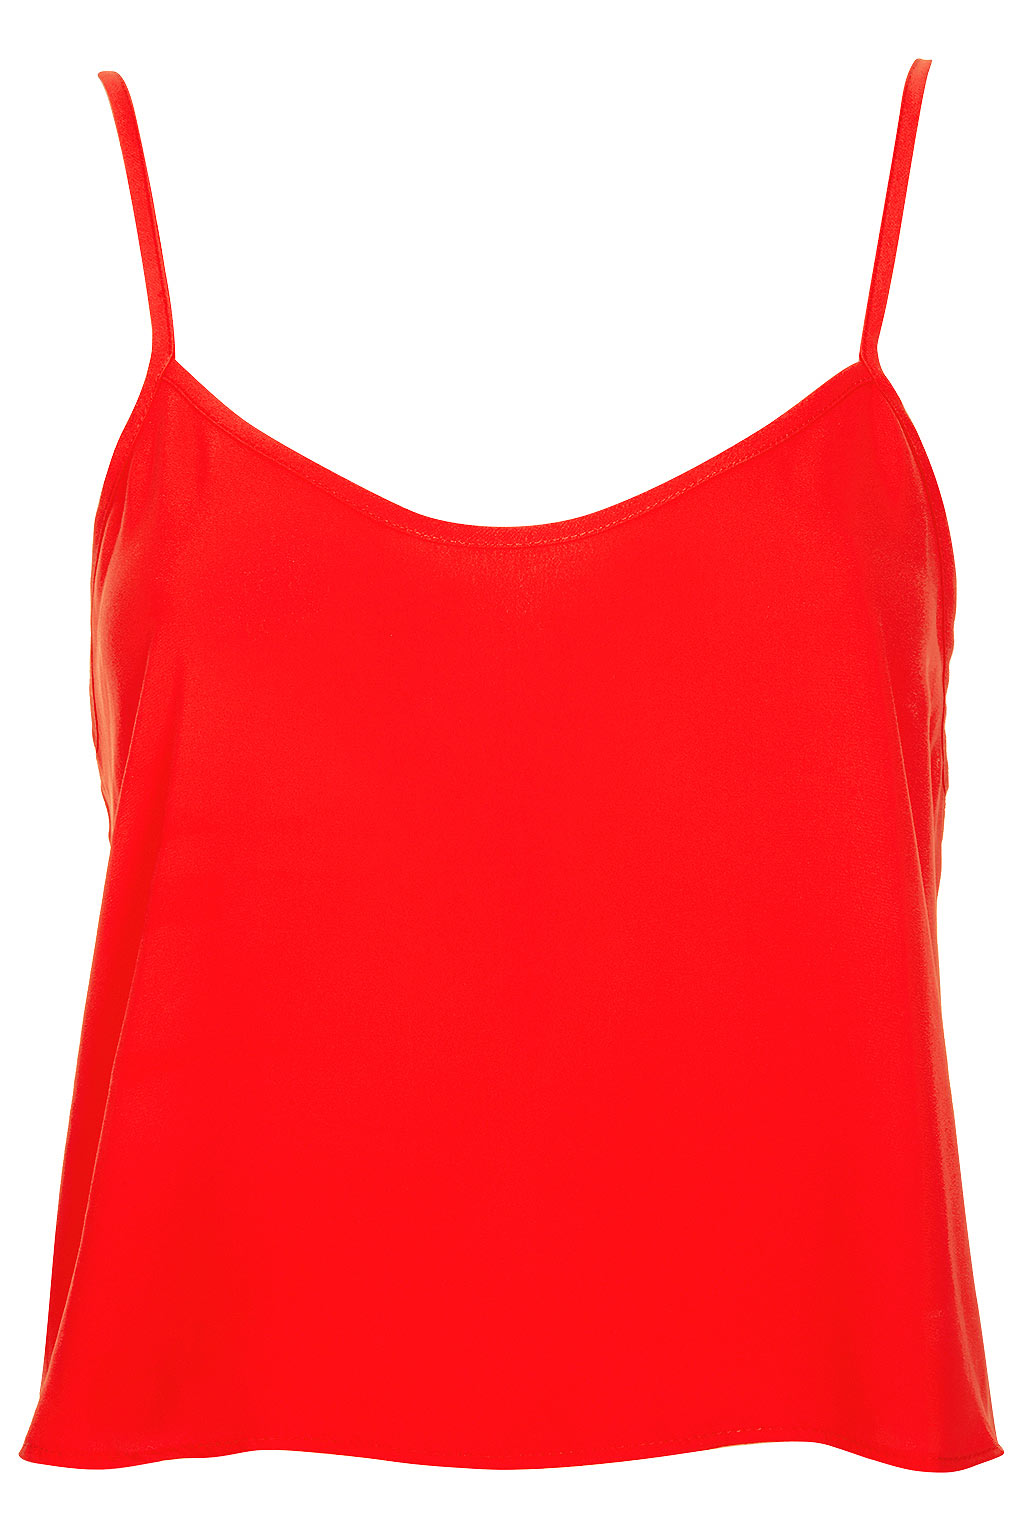 Topshop Crop Strappy Cami in Red | Lyst